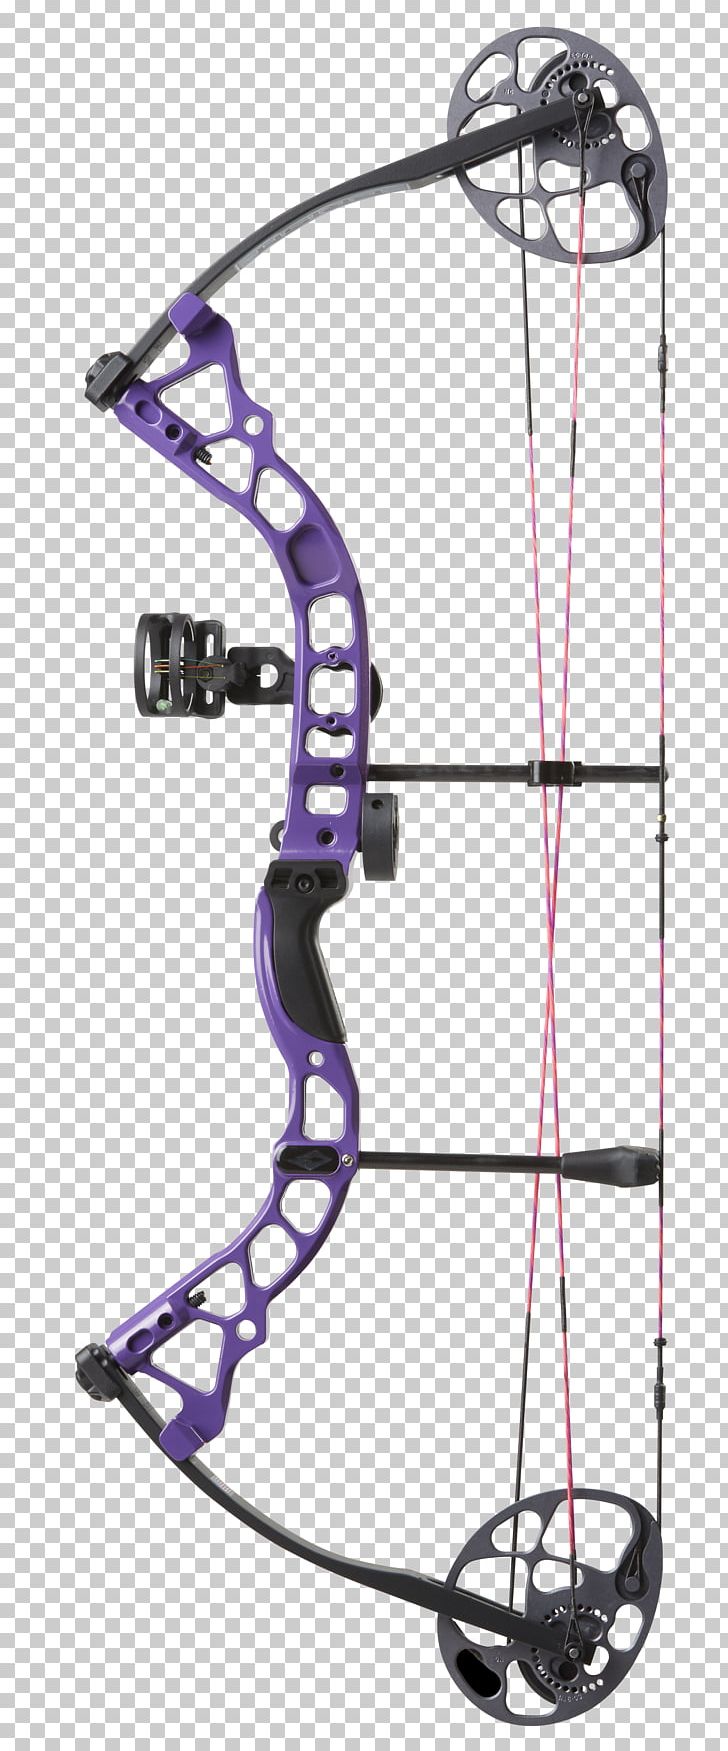 Compound Bows Bow And Arrow Archery Hunting Binary Cam PNG, Clipart, Archery, Biggame Hunting, Binary Cam, Bow, Bow And Arrow Free PNG Download